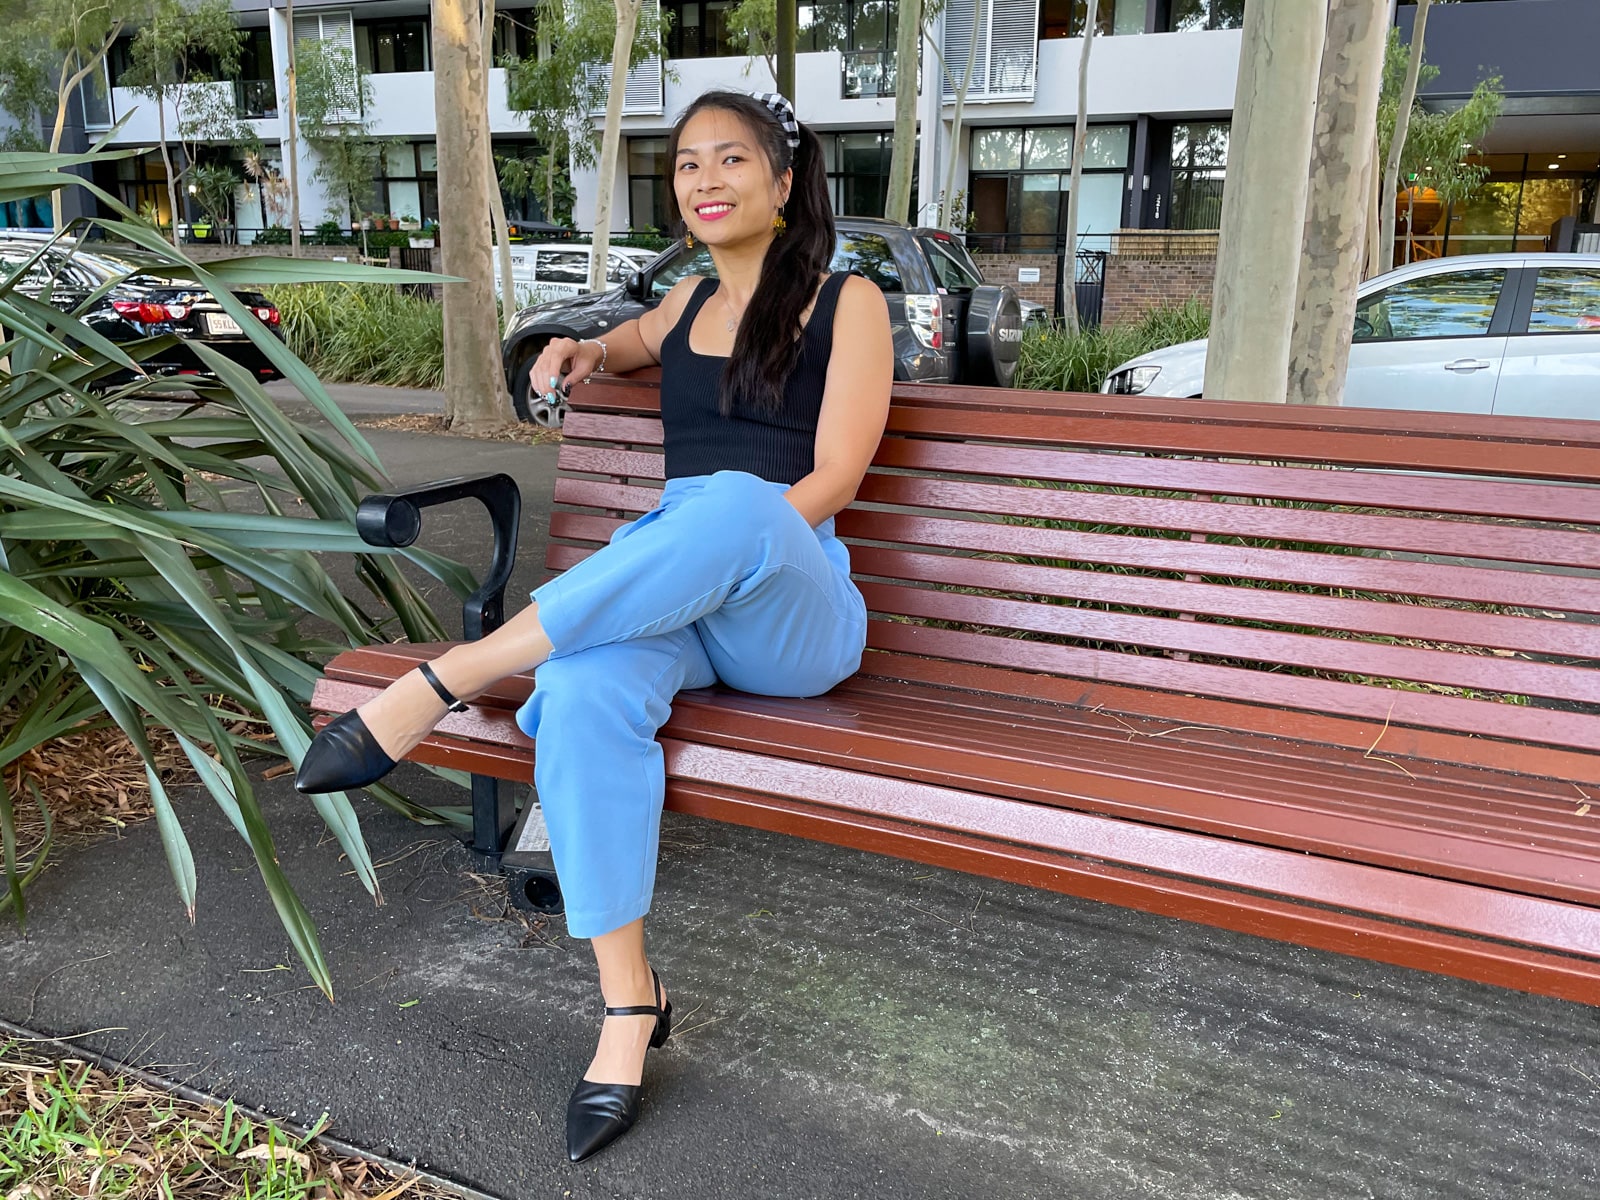 An Asian woman wearing a black square neck sleeveless top, sky blue trouser pants, and pointed black sandals. She is sitting on a wooden park bench and has one leg crossed over the other, and an arm leaning on the back of the bench.